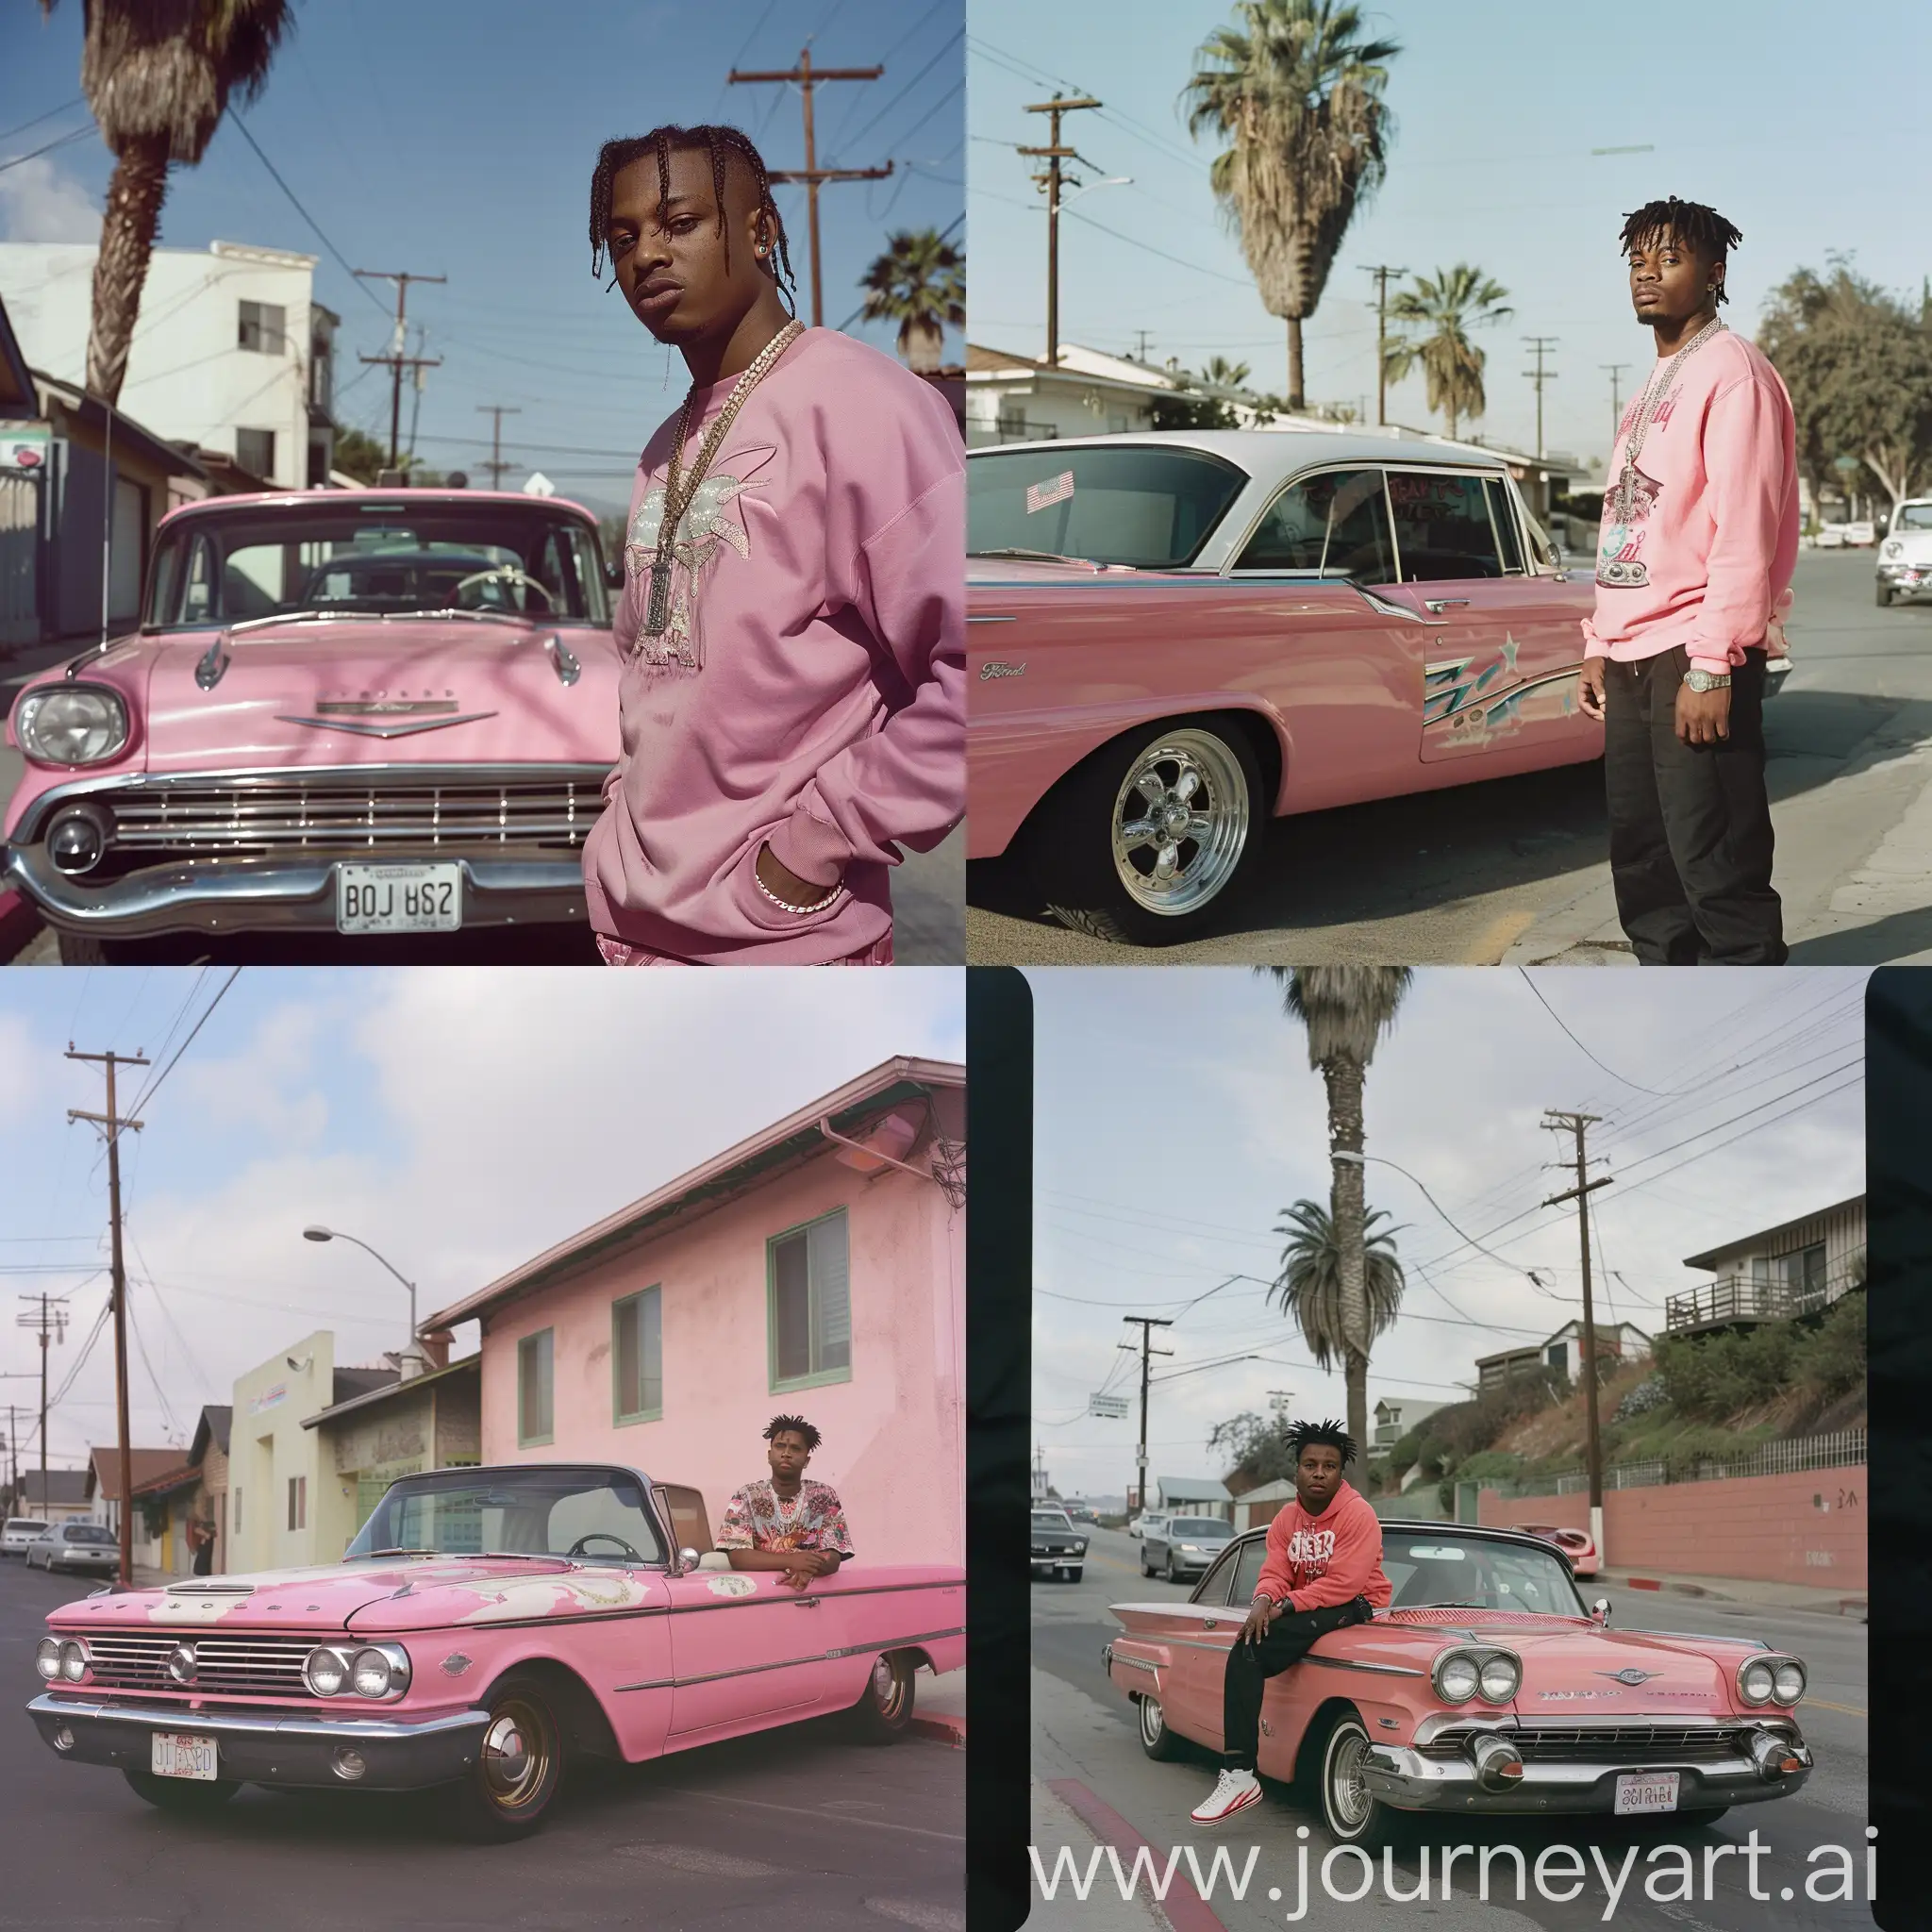 a photograph of juice wrld by a 1959 pink ford on a street in los angeles.